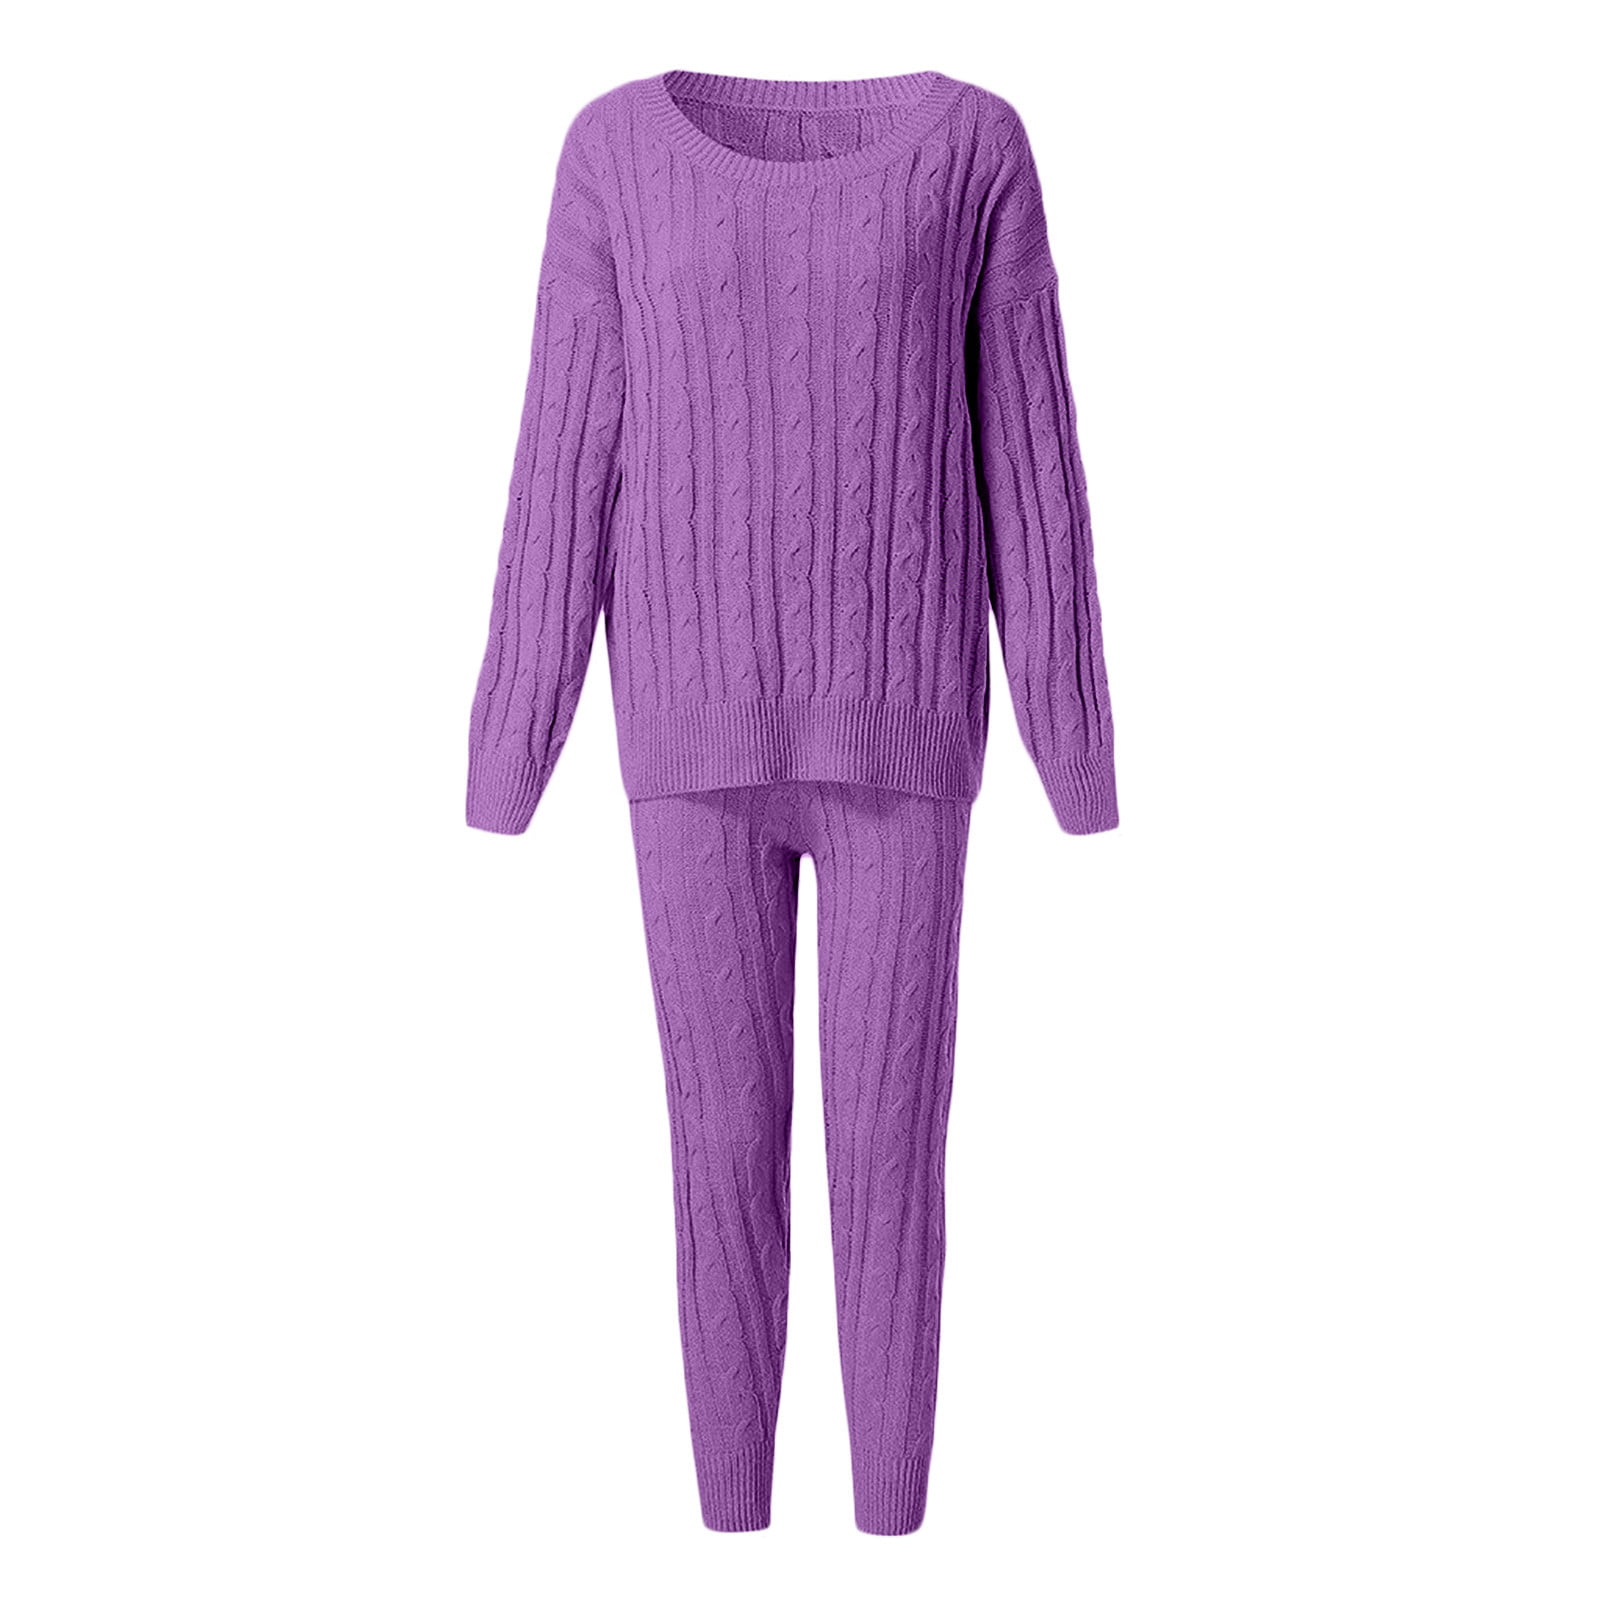 Sweater Plus 18(Xxxxxl) Picks Shoulder Womens Warm Pants Color Sleeve Suit Long UTTOASFAY Cable off Pants Two-Piece Size Clearance Knitted Set Purple Long Women Flash Solid